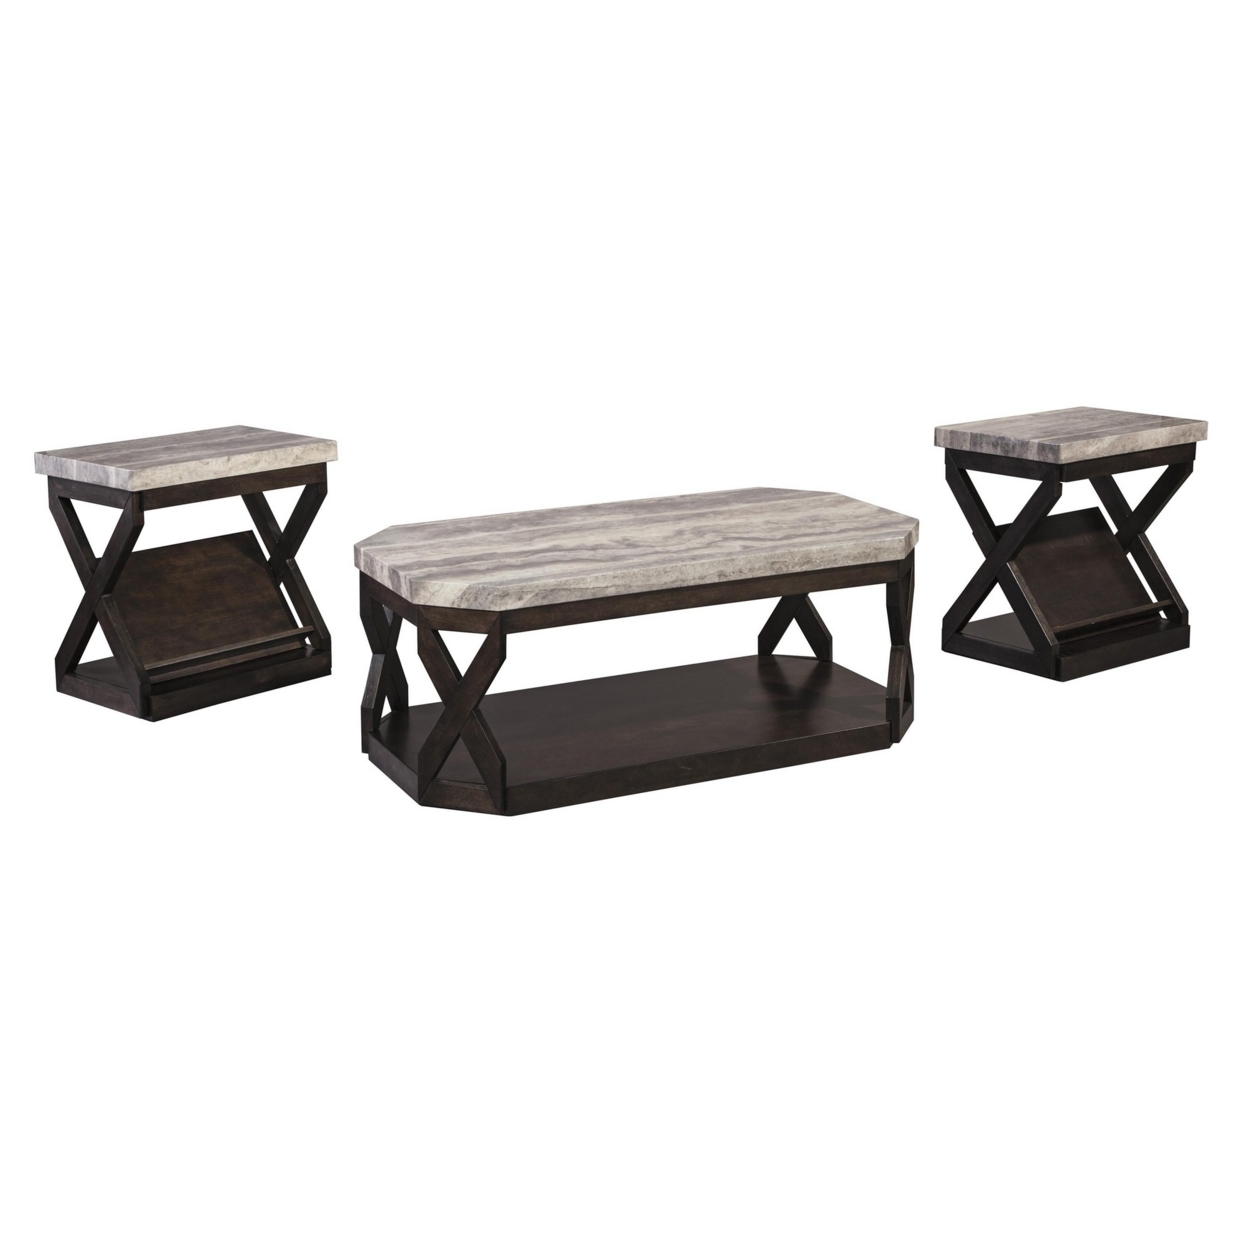 Faux Marble Table Set With 1 Coffee Table And 2 End Tables, Gray And Brown- Saltoro Sherpi